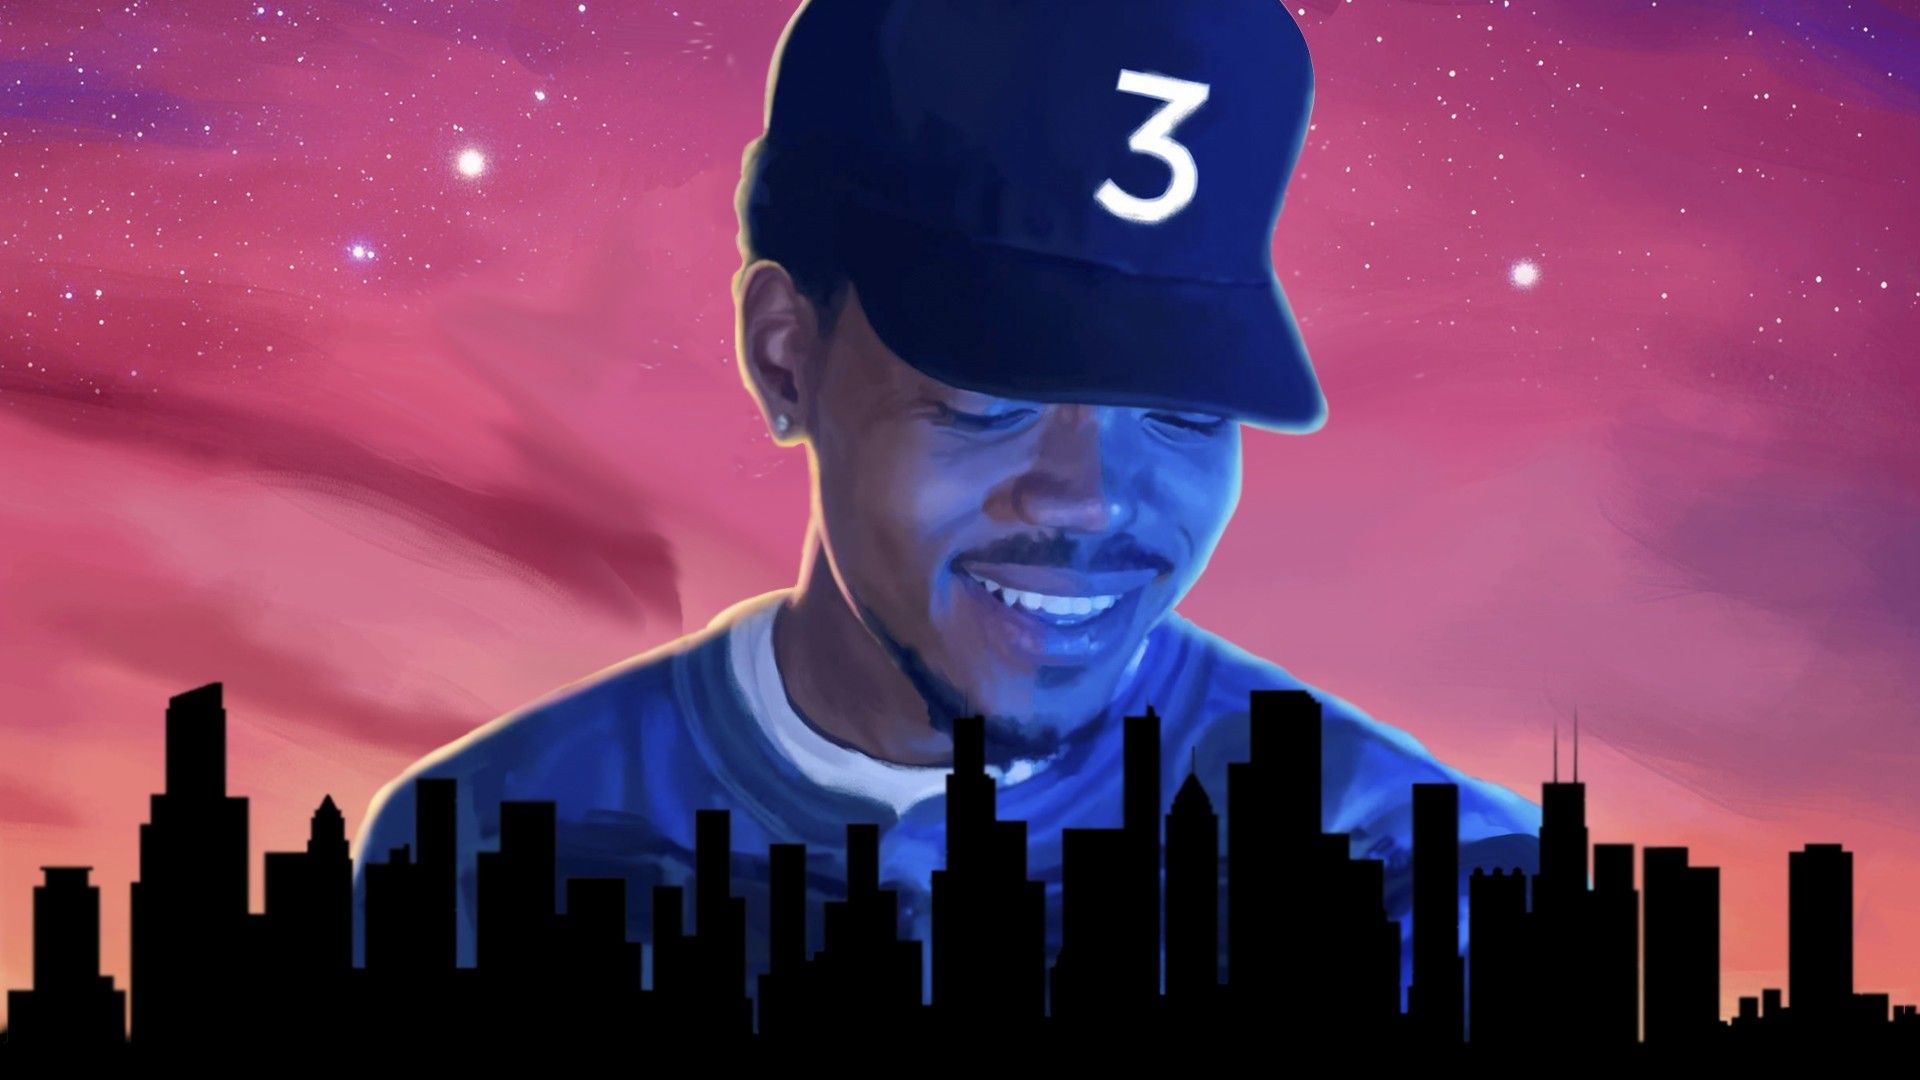 Chance the Rapper Wallpaper: 18 Image